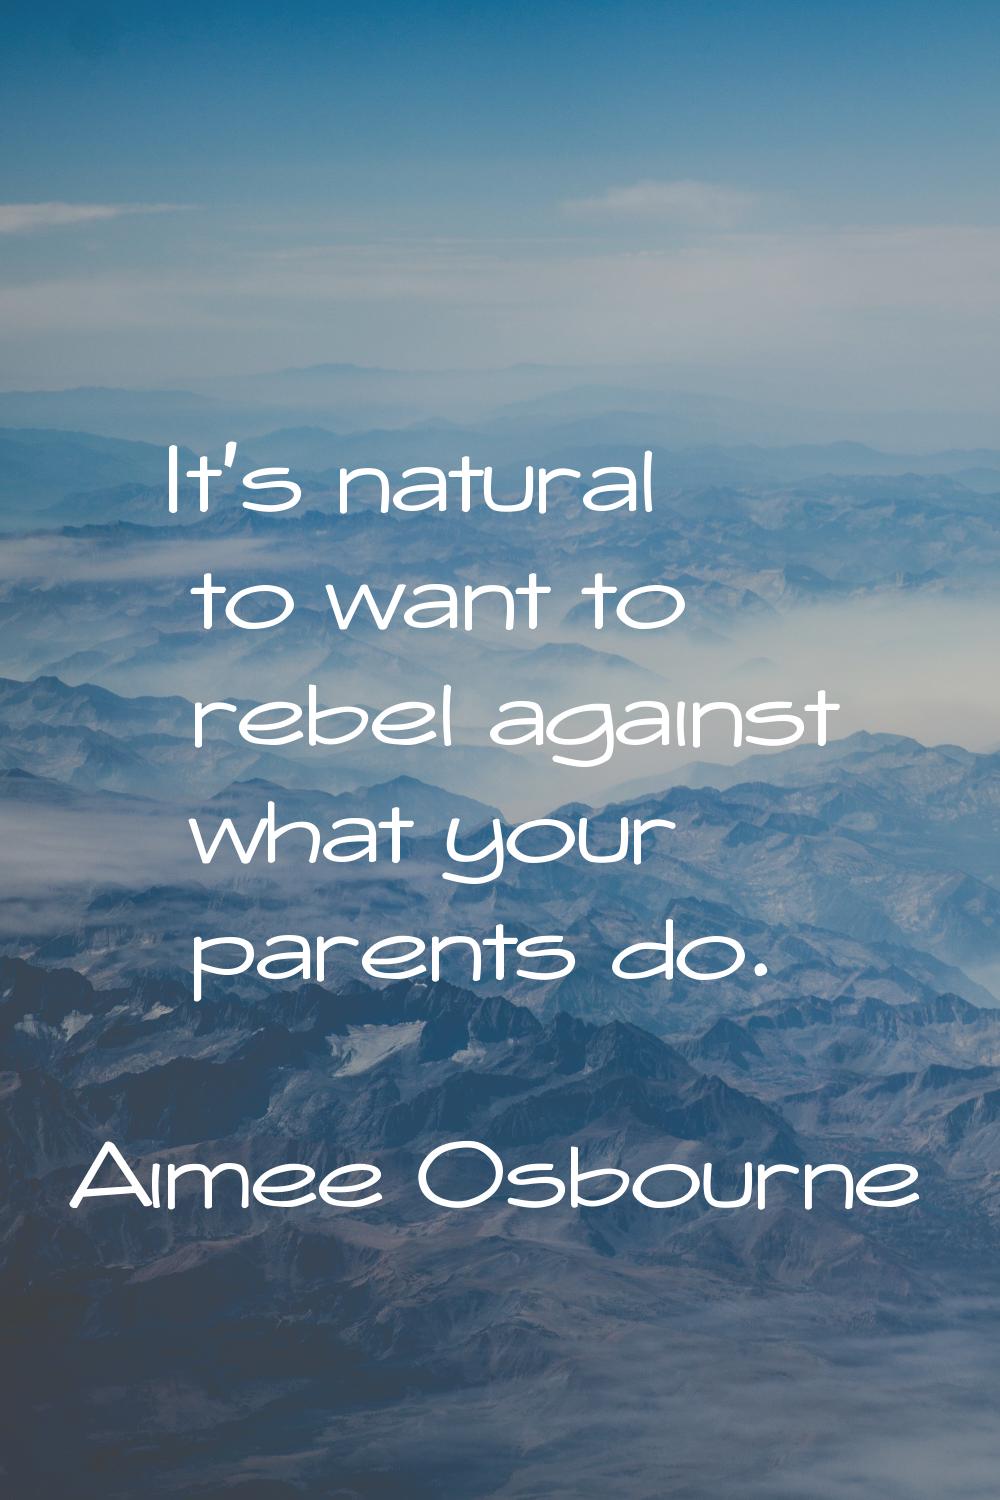 It's natural to want to rebel against what your parents do.